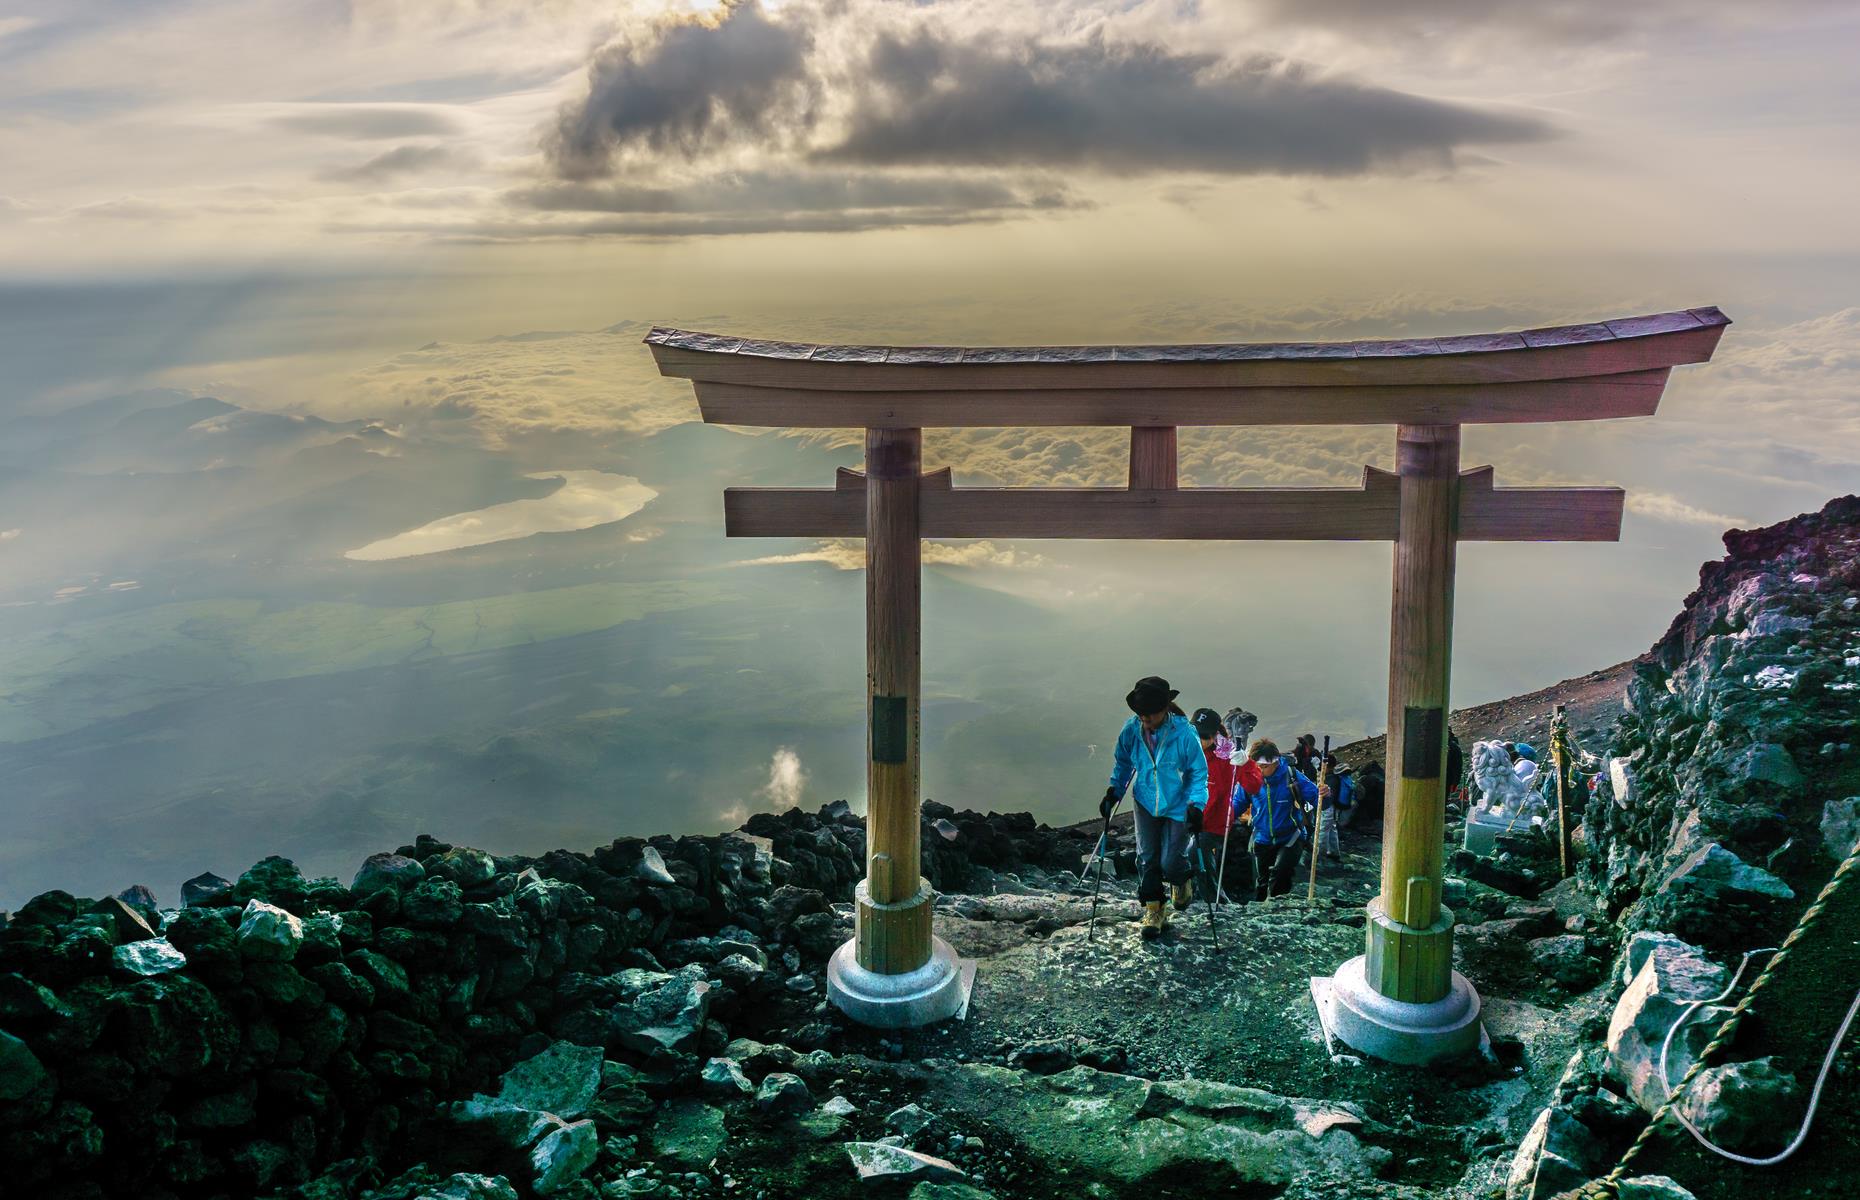 Fuji-san, as it is reverently known in Japanese, is integral to Japanese identity. Climbing its rocky slopes will allow you to learn more about the country’s culture. Look out for the torii gate on the mountaintop, which marks the entrance to sacred ground: Fuji, after all, is revered in the Shinto faith.